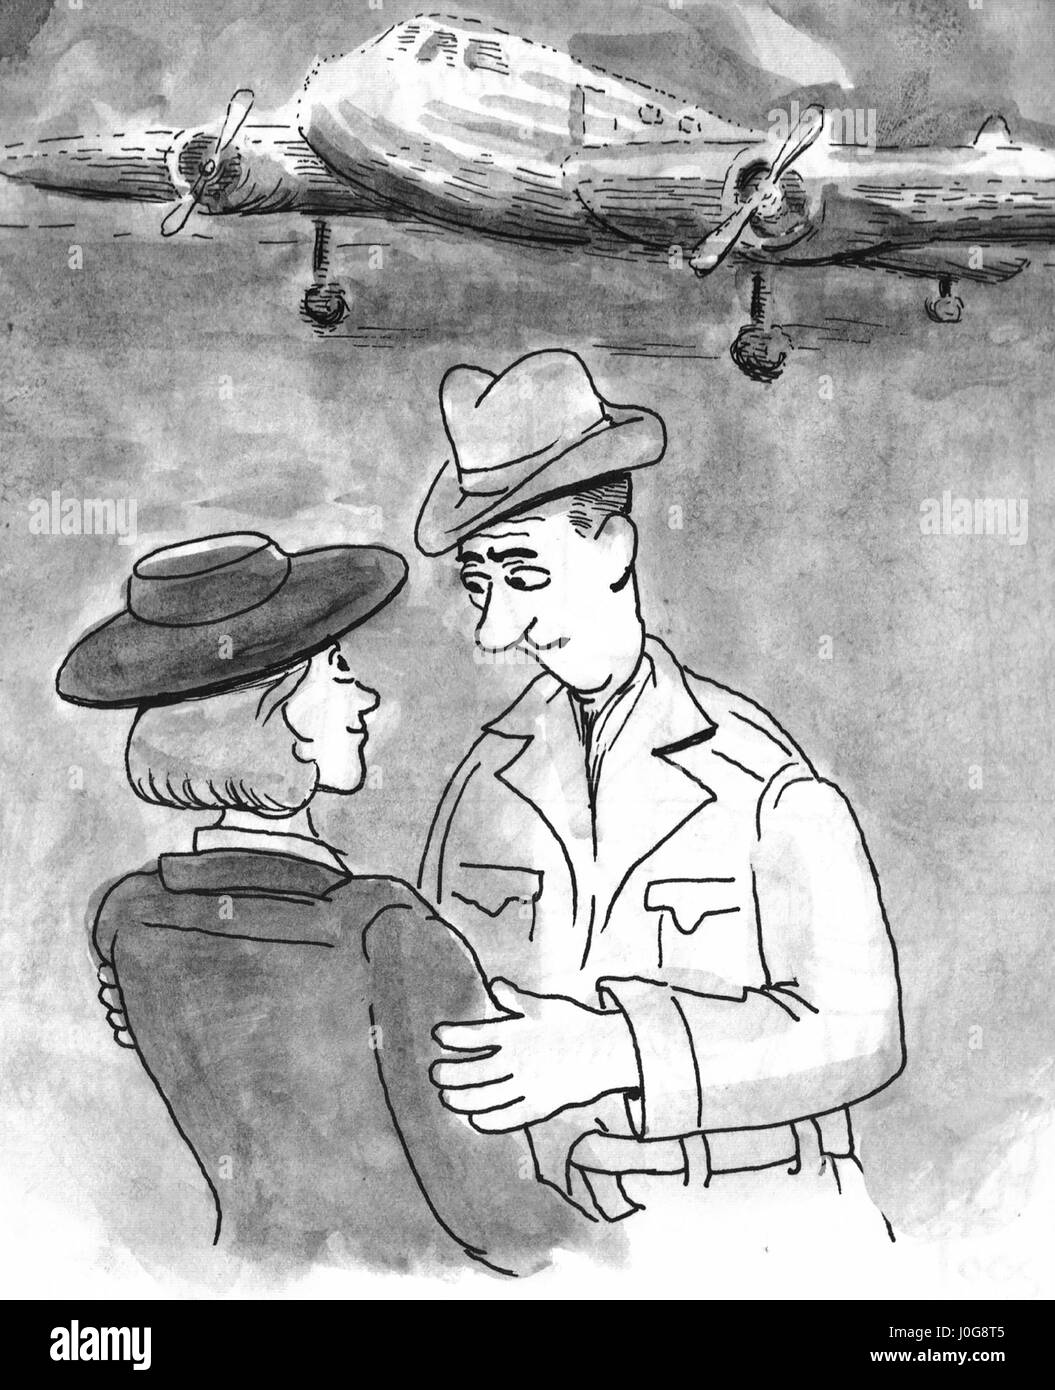 Cartoon illustration of a couple saying farewell at the airport. Stock Photo